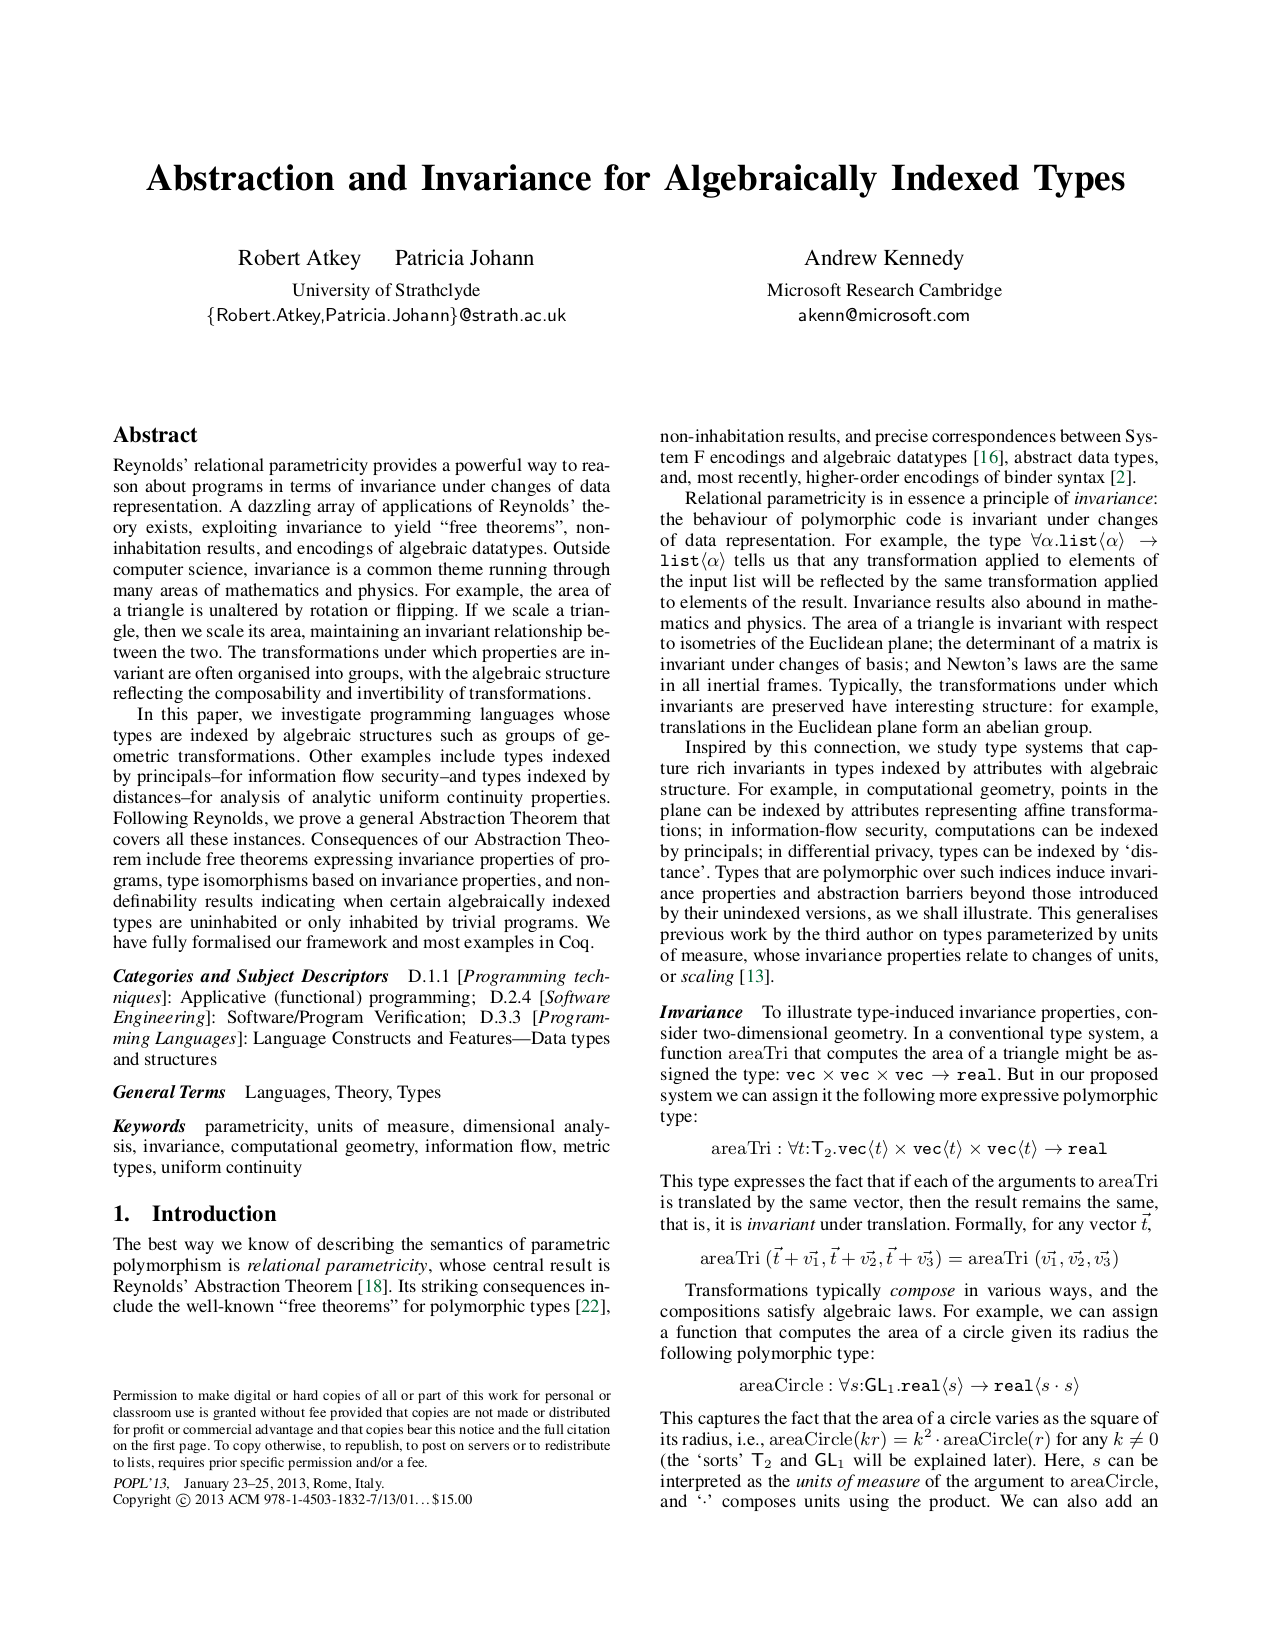 Thumbnail of paper "Abstraction and Invariance for Algebraically Indexed Types